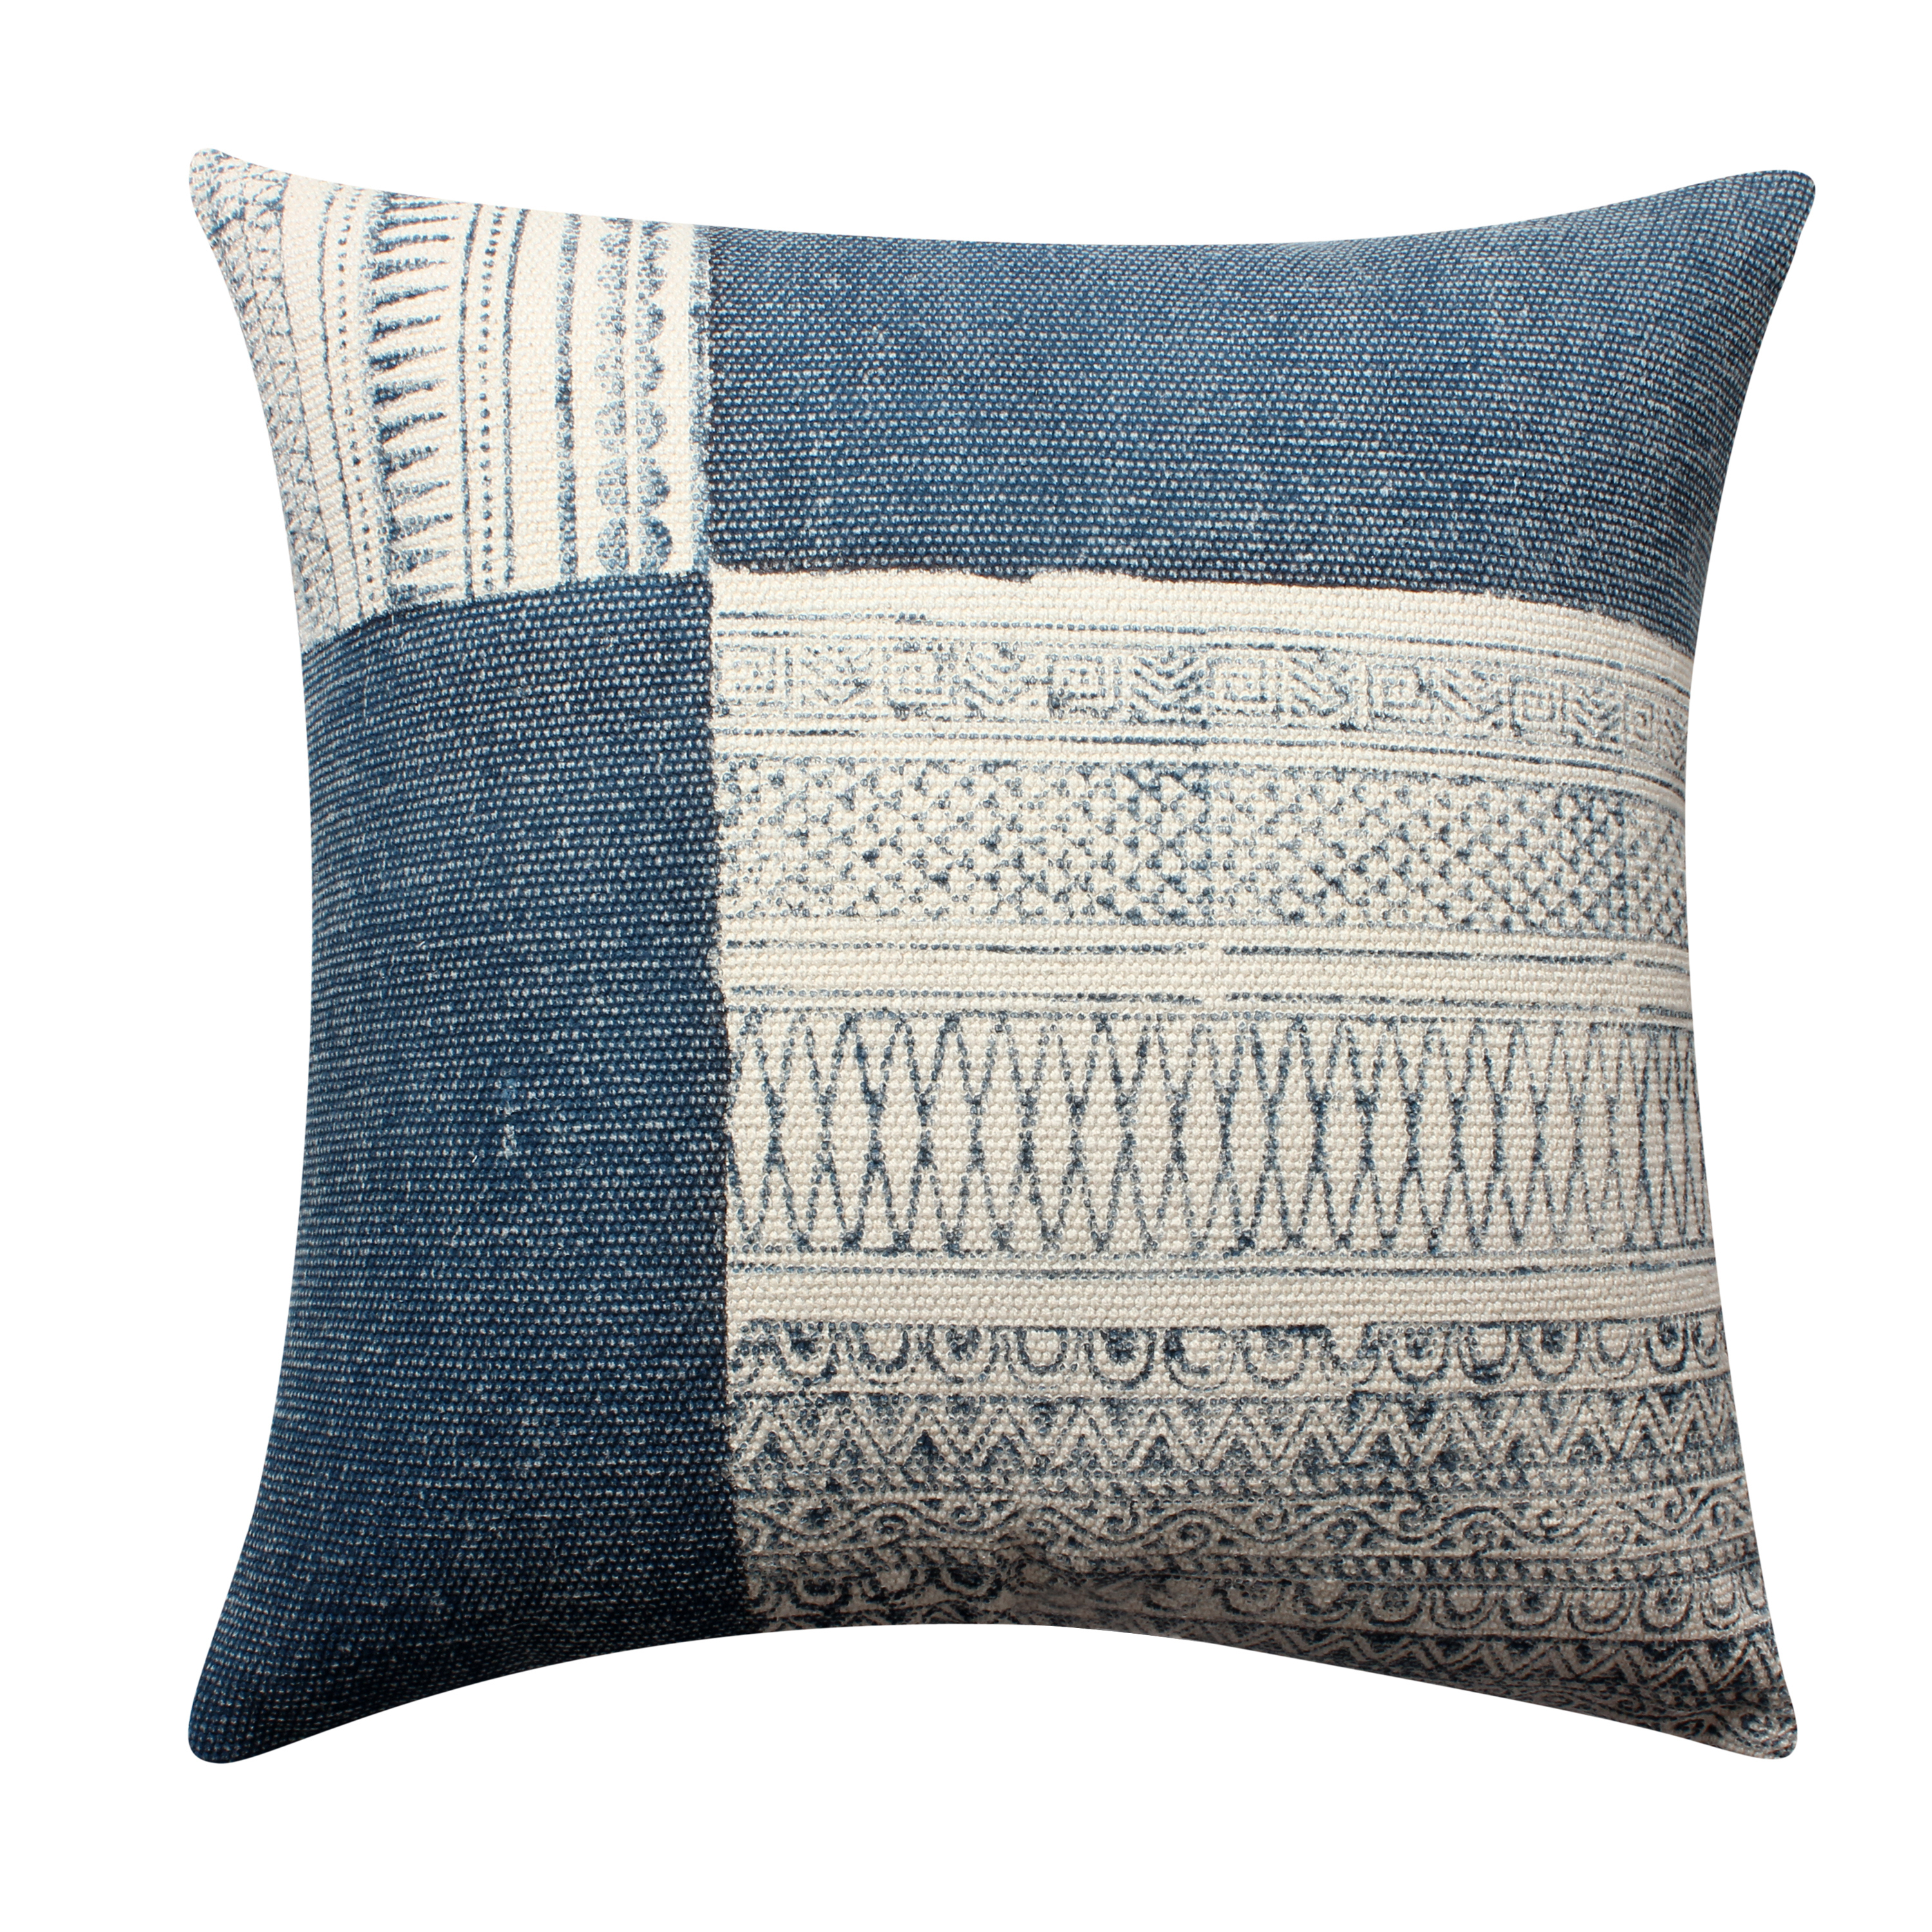 Dae 24 x 24 Square Handwoven Cotton Accent Throw Pillow, Classic Simple Kilim Pattern, Blue, Off White